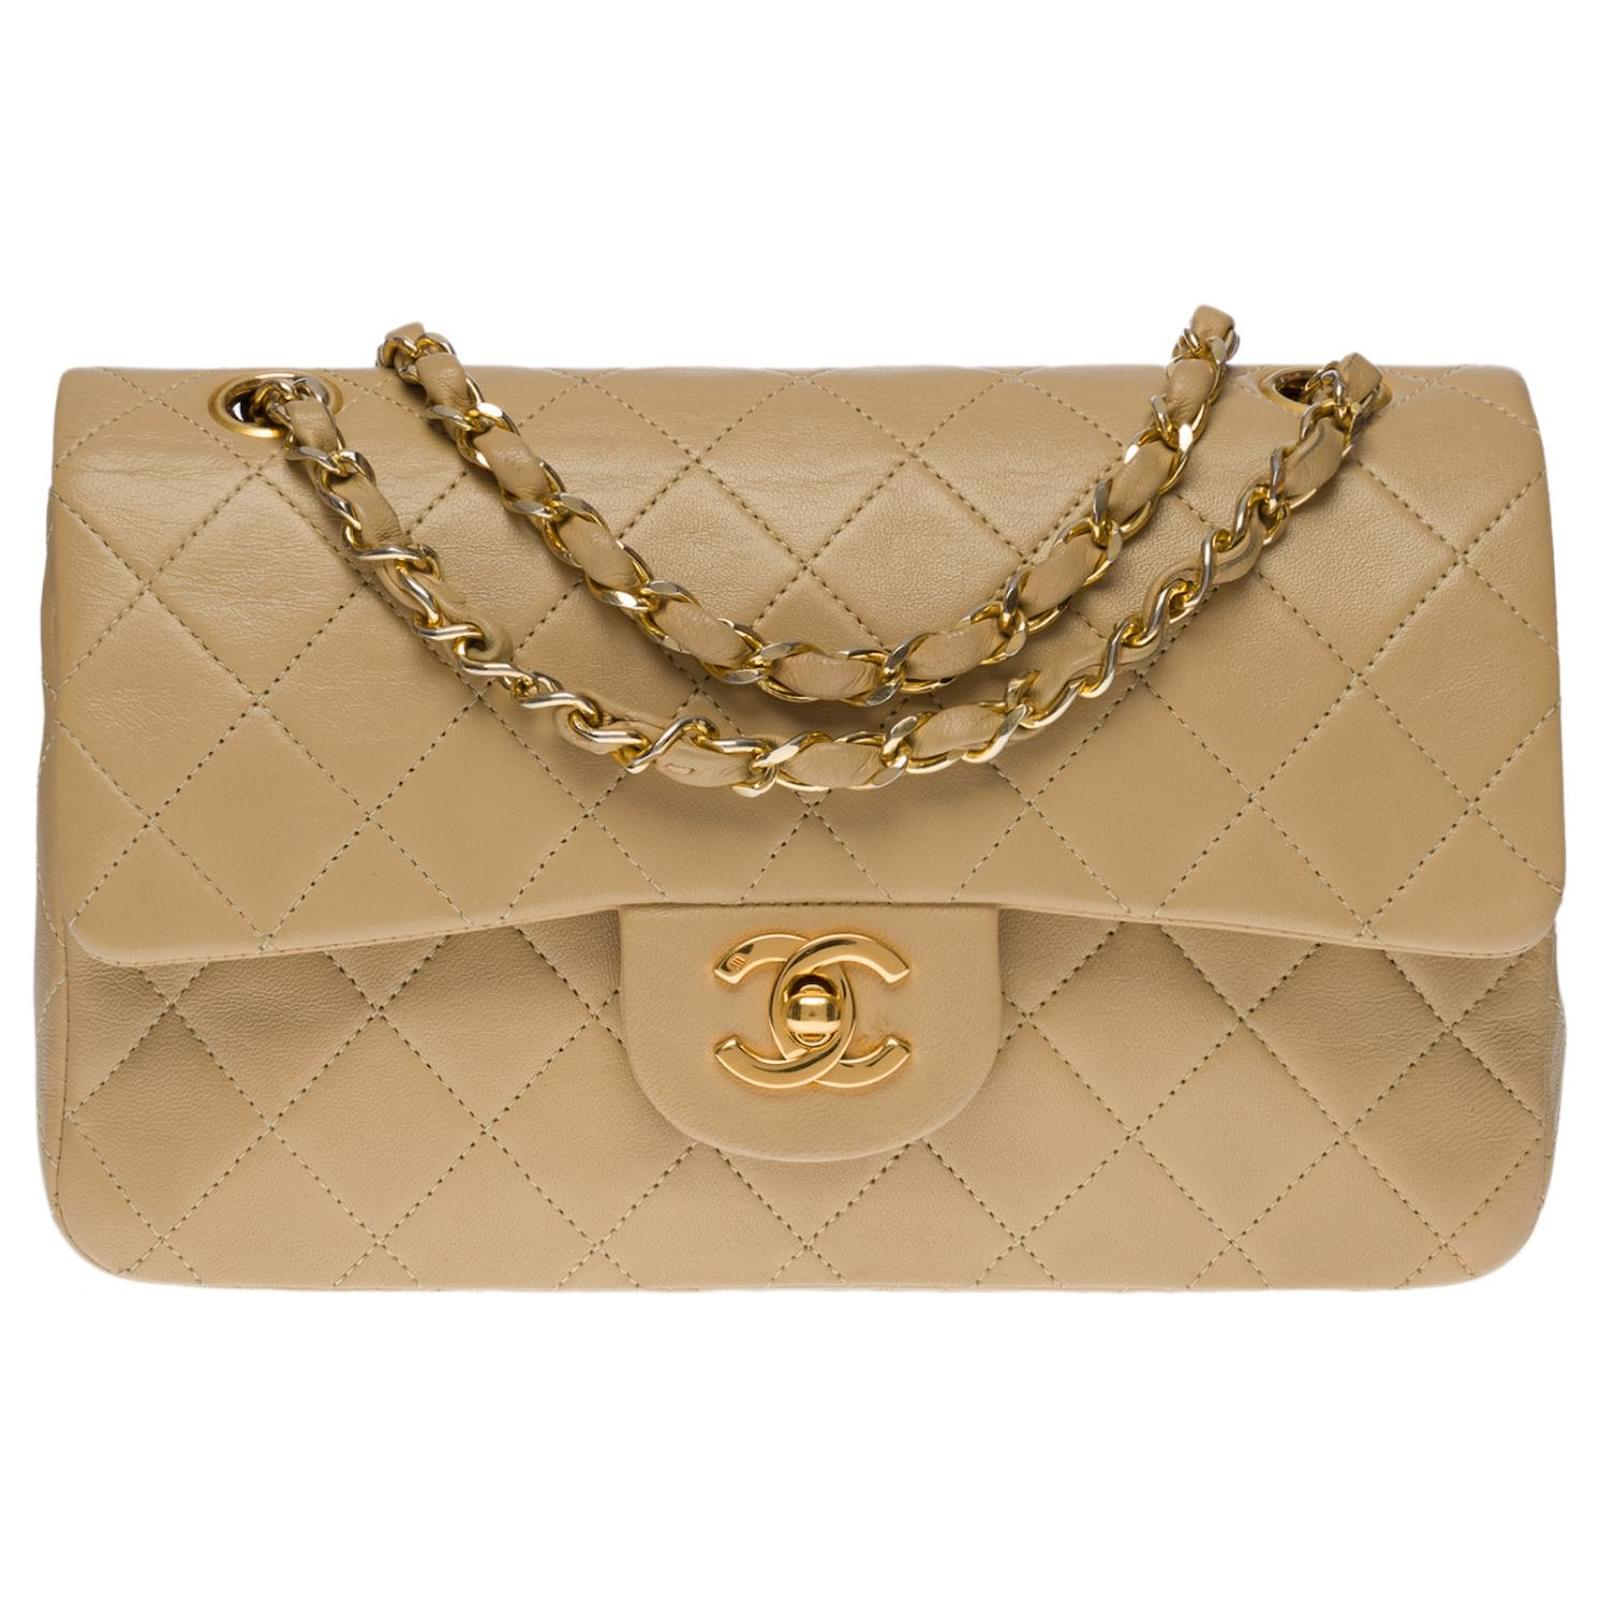 The coveted Chanel Timeless bag 23 cm with lined flap in beige